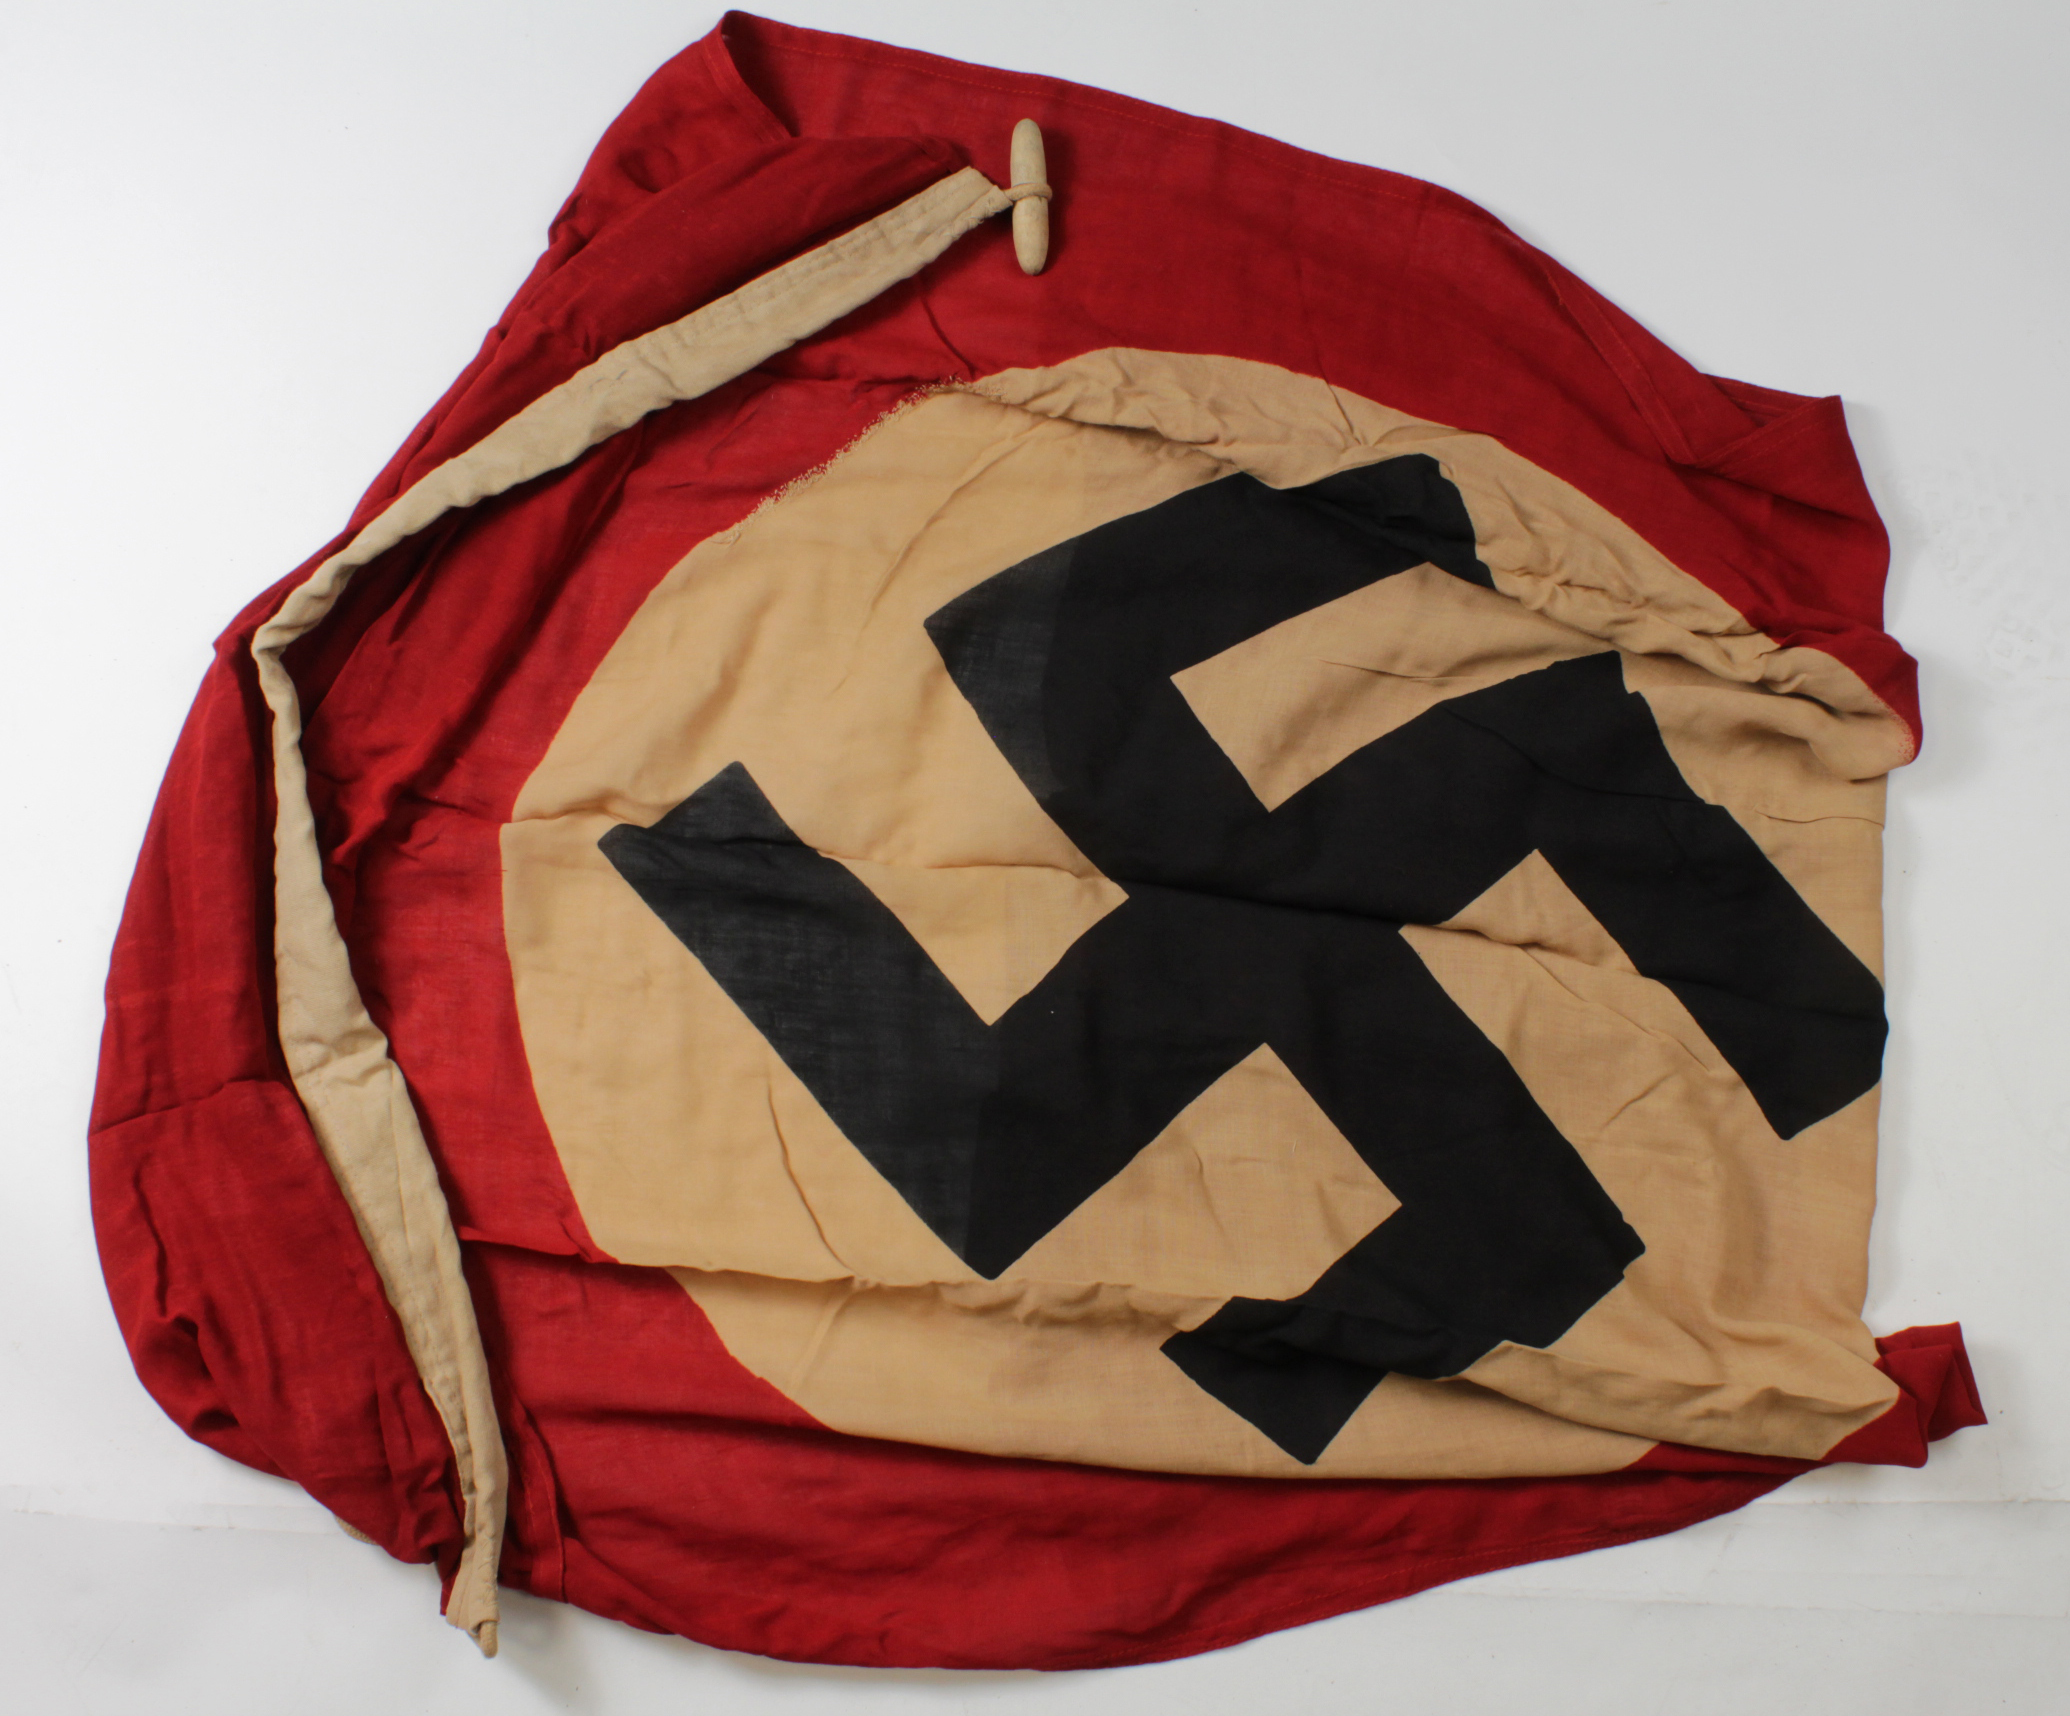 German WW2 Party flag, approx 5x3 feet, wartime issue stamped